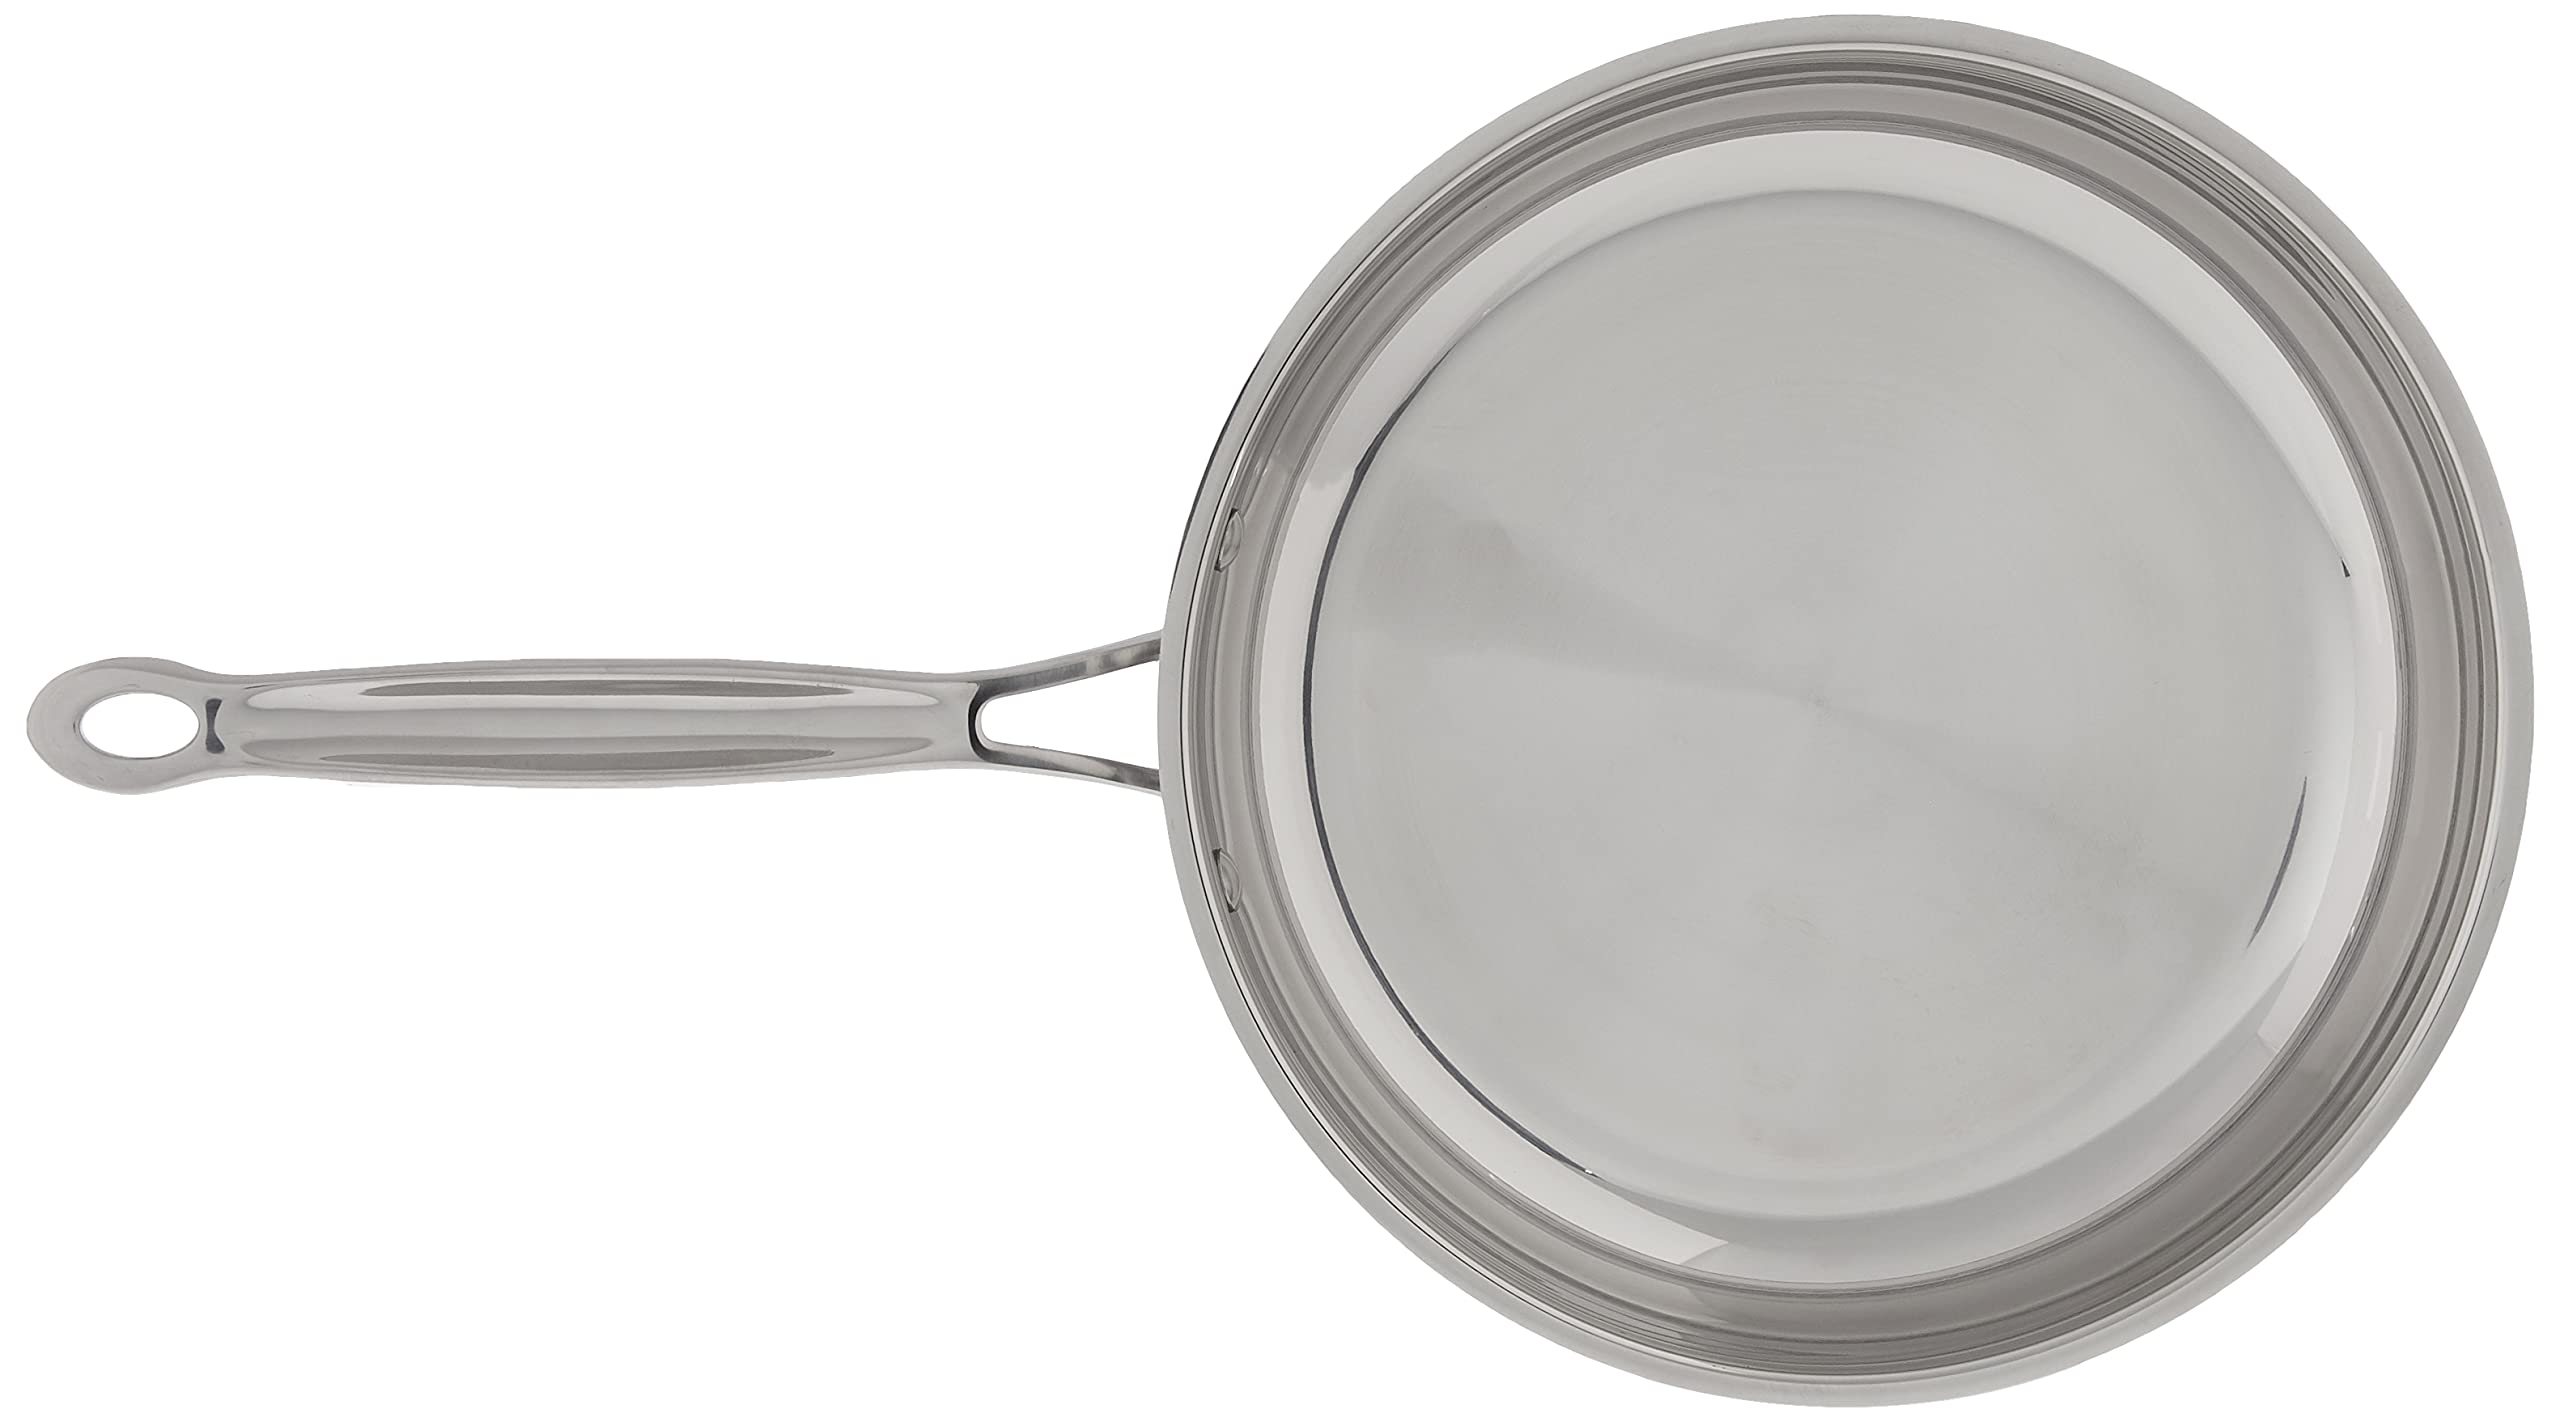 Cuisinart 722-24 10-Inch Chef's-Classic-Stainless-Cookware-Collection, Open Skillet & 722-20 8-Inch Chef's-Classic-Stainless-Cookware-Collection, 8", Open Skillet